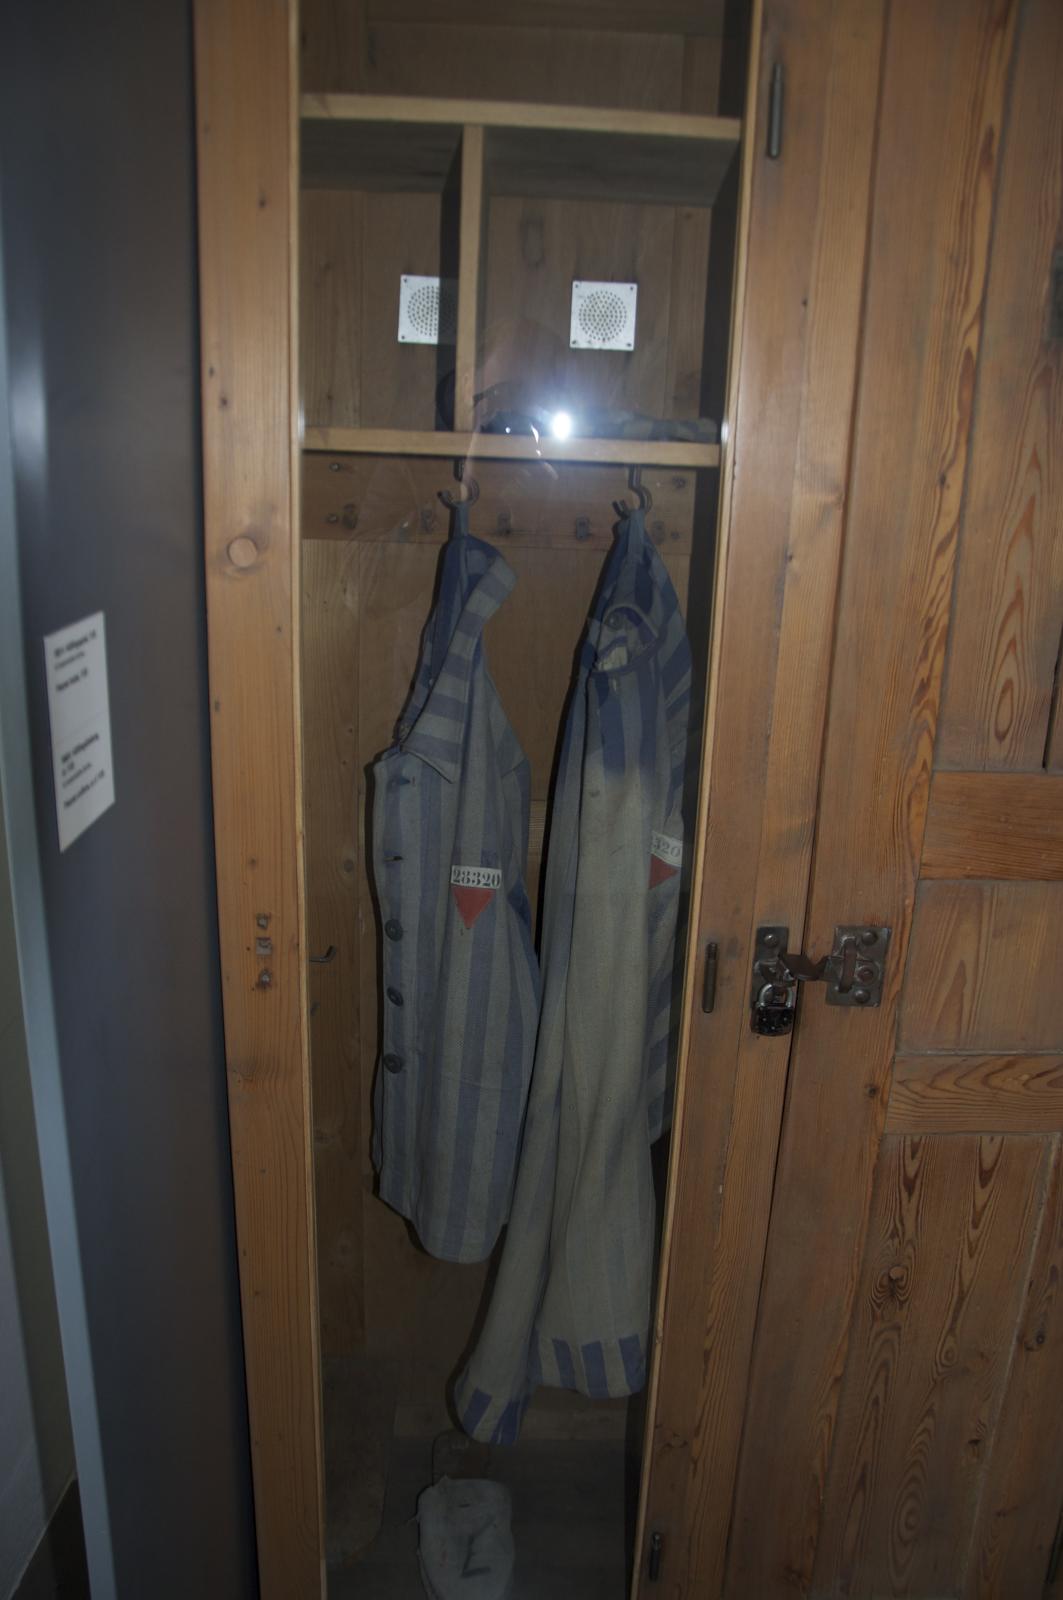 two towels that are in a wooden wardrobe